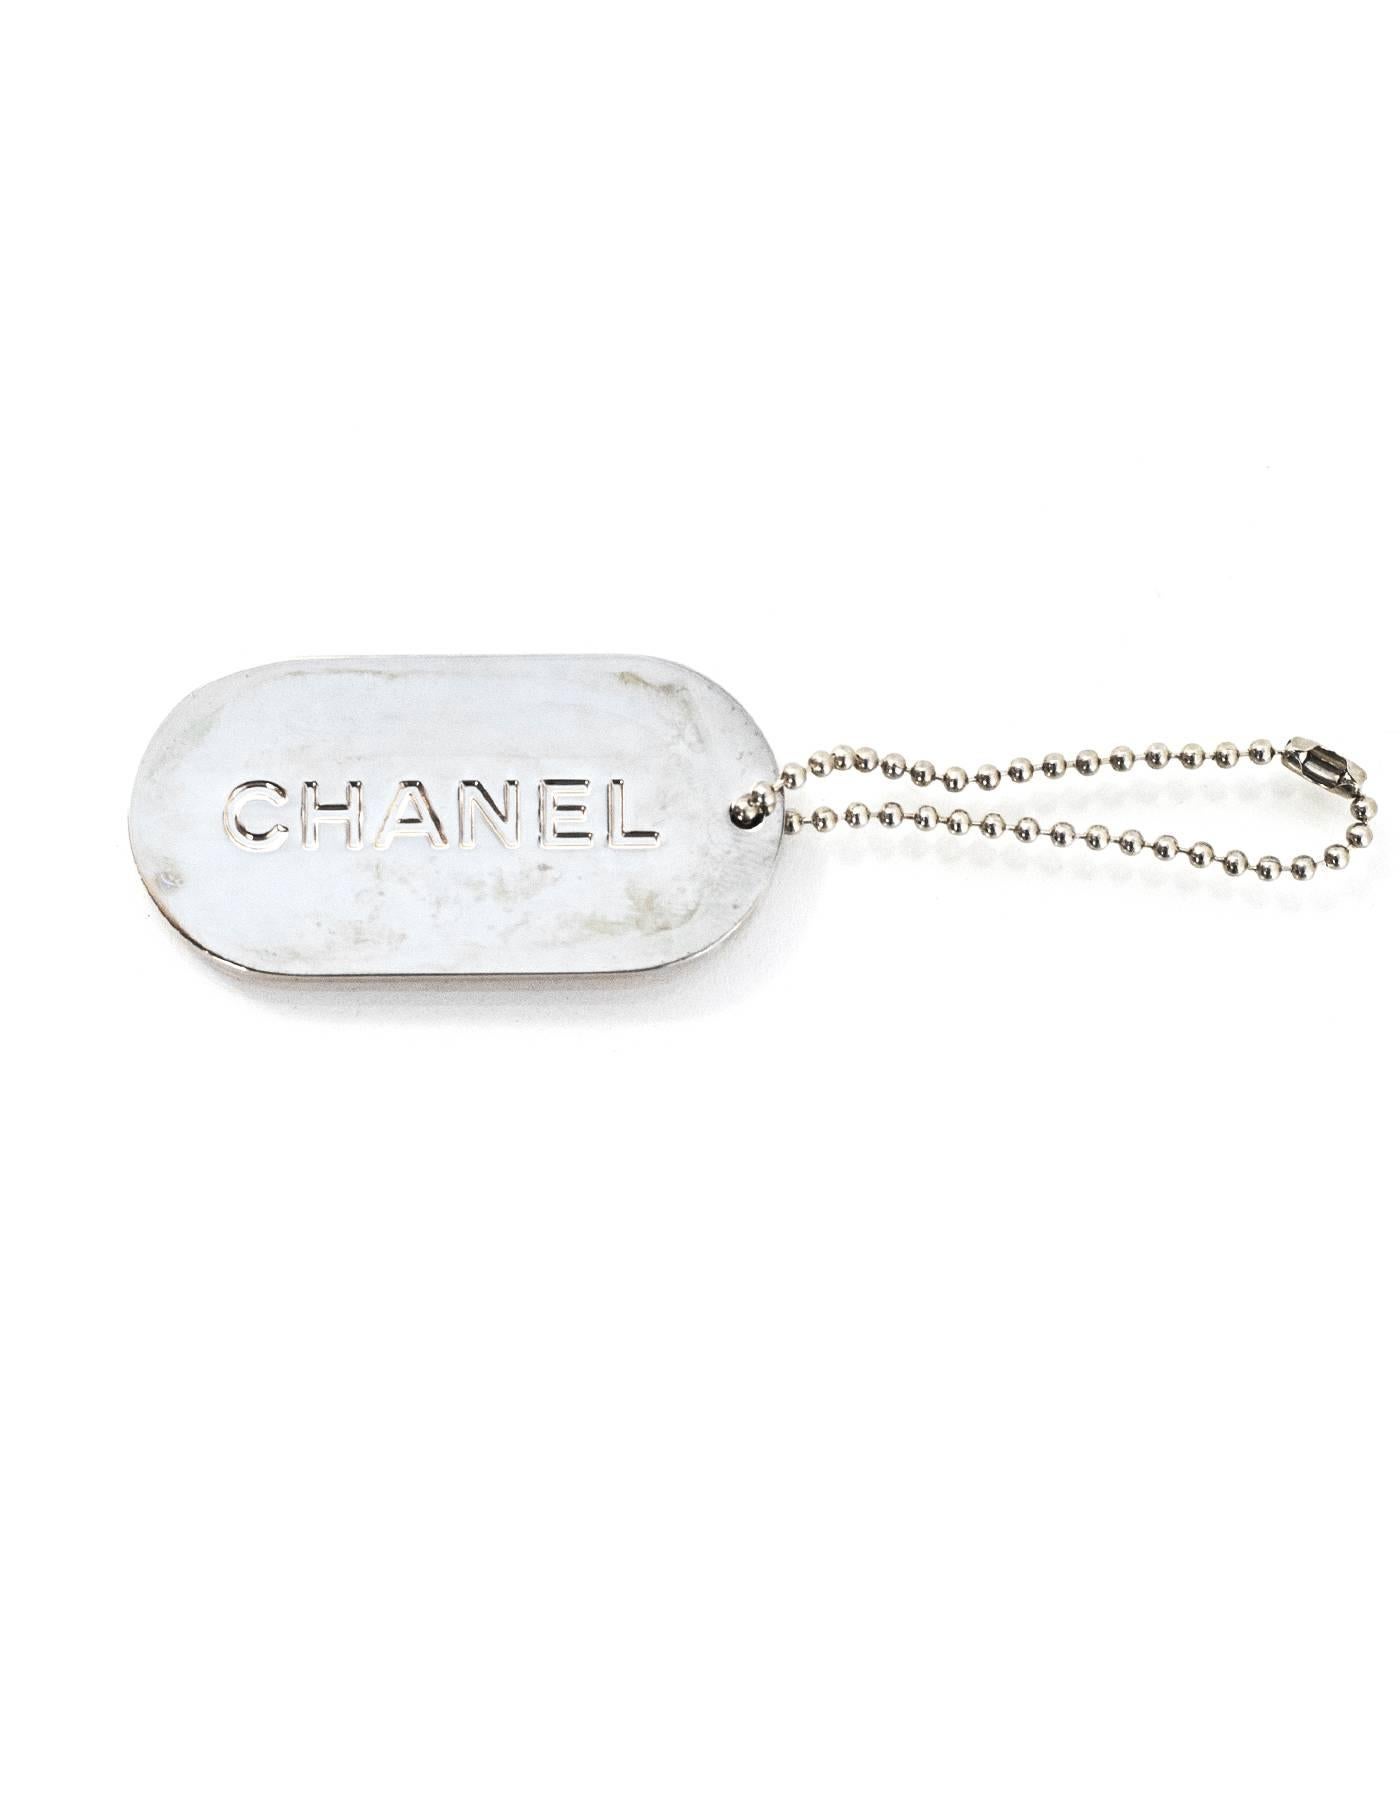 Chanel Peach & Gold Dog Tag Key Chain/Charm

Color: Peach, goldtone
Materials: Metal, enamel
Closure: Ball closure
Stamp: Chanel
Overall Condition: Excellent pre-owned condition

Measurements: 
Pendant: 2